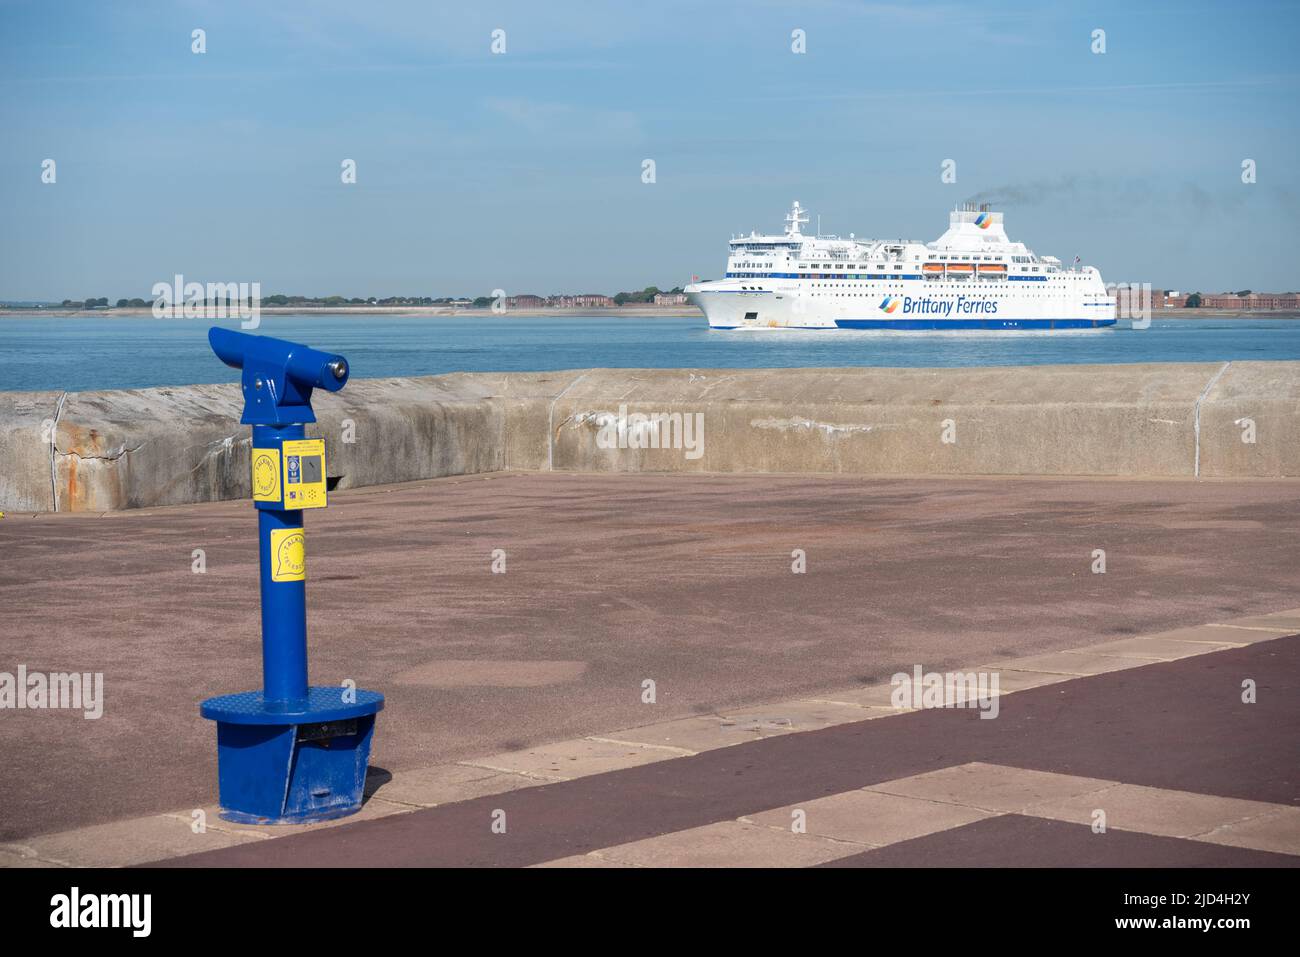 Normandie, one of Brittany Ferries ships leaving Portsmouth harbour, Southsea promenade in the foreground with a talking telescope. Stock Photo